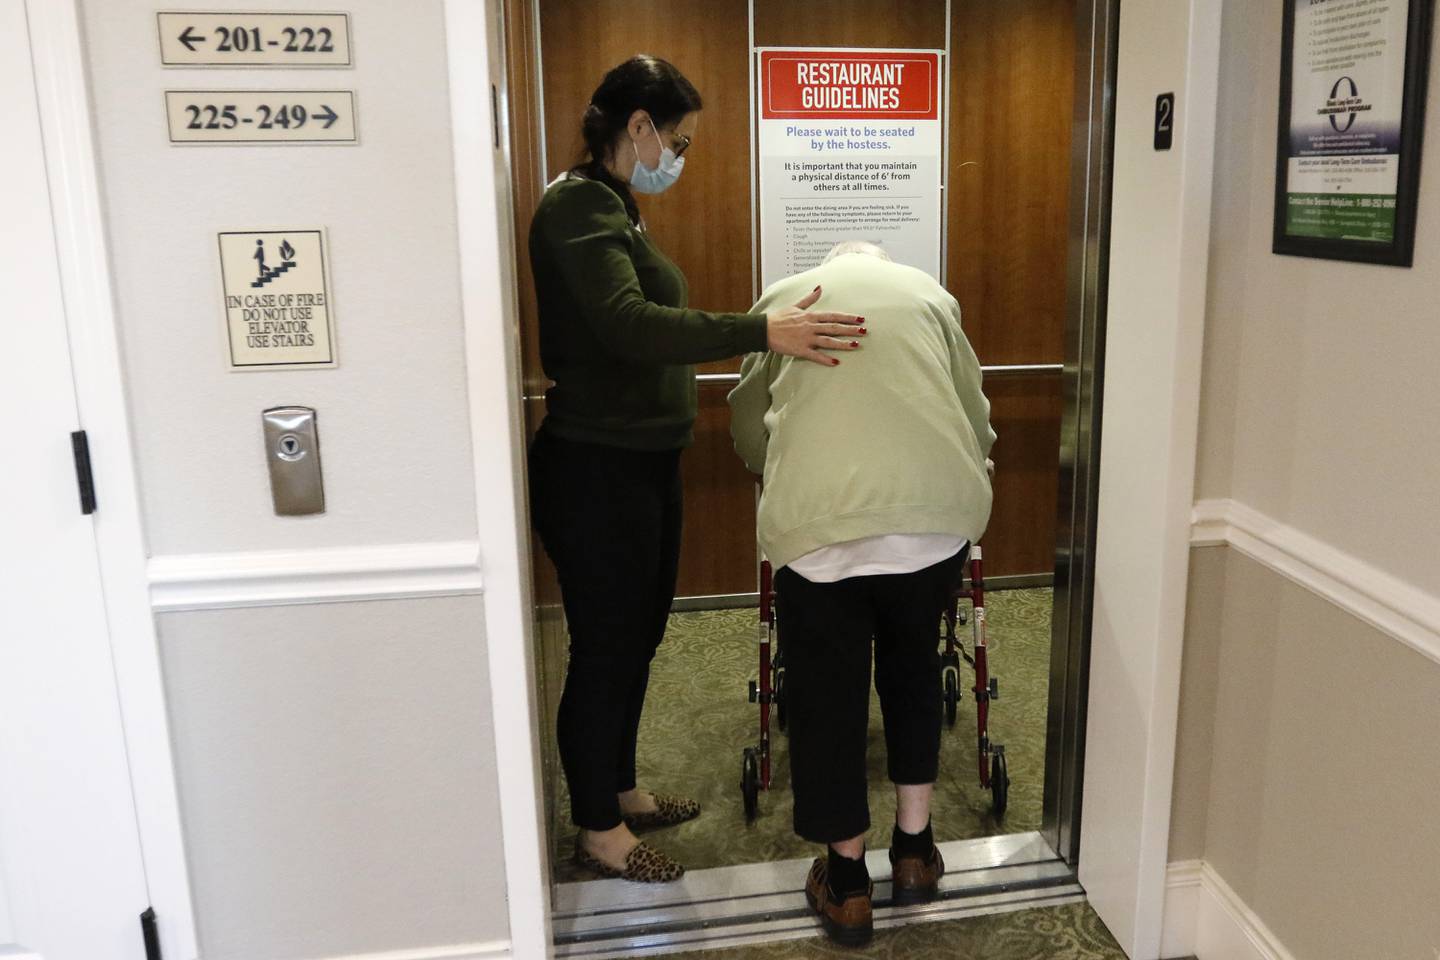 Ewa Kroupa, director of nursing, left, guides resident Rosemary Buttstadt onto the elevator to head down for breakfast Monday, Nov. 22, 2021, at Three Oaks Assisted Living and Memory Care in Cary.  The senior residence has been among many local employers having difficulties filling positions and keeping them filled. Many of the current employees, including upper management, pitch in with duties while understaffed.